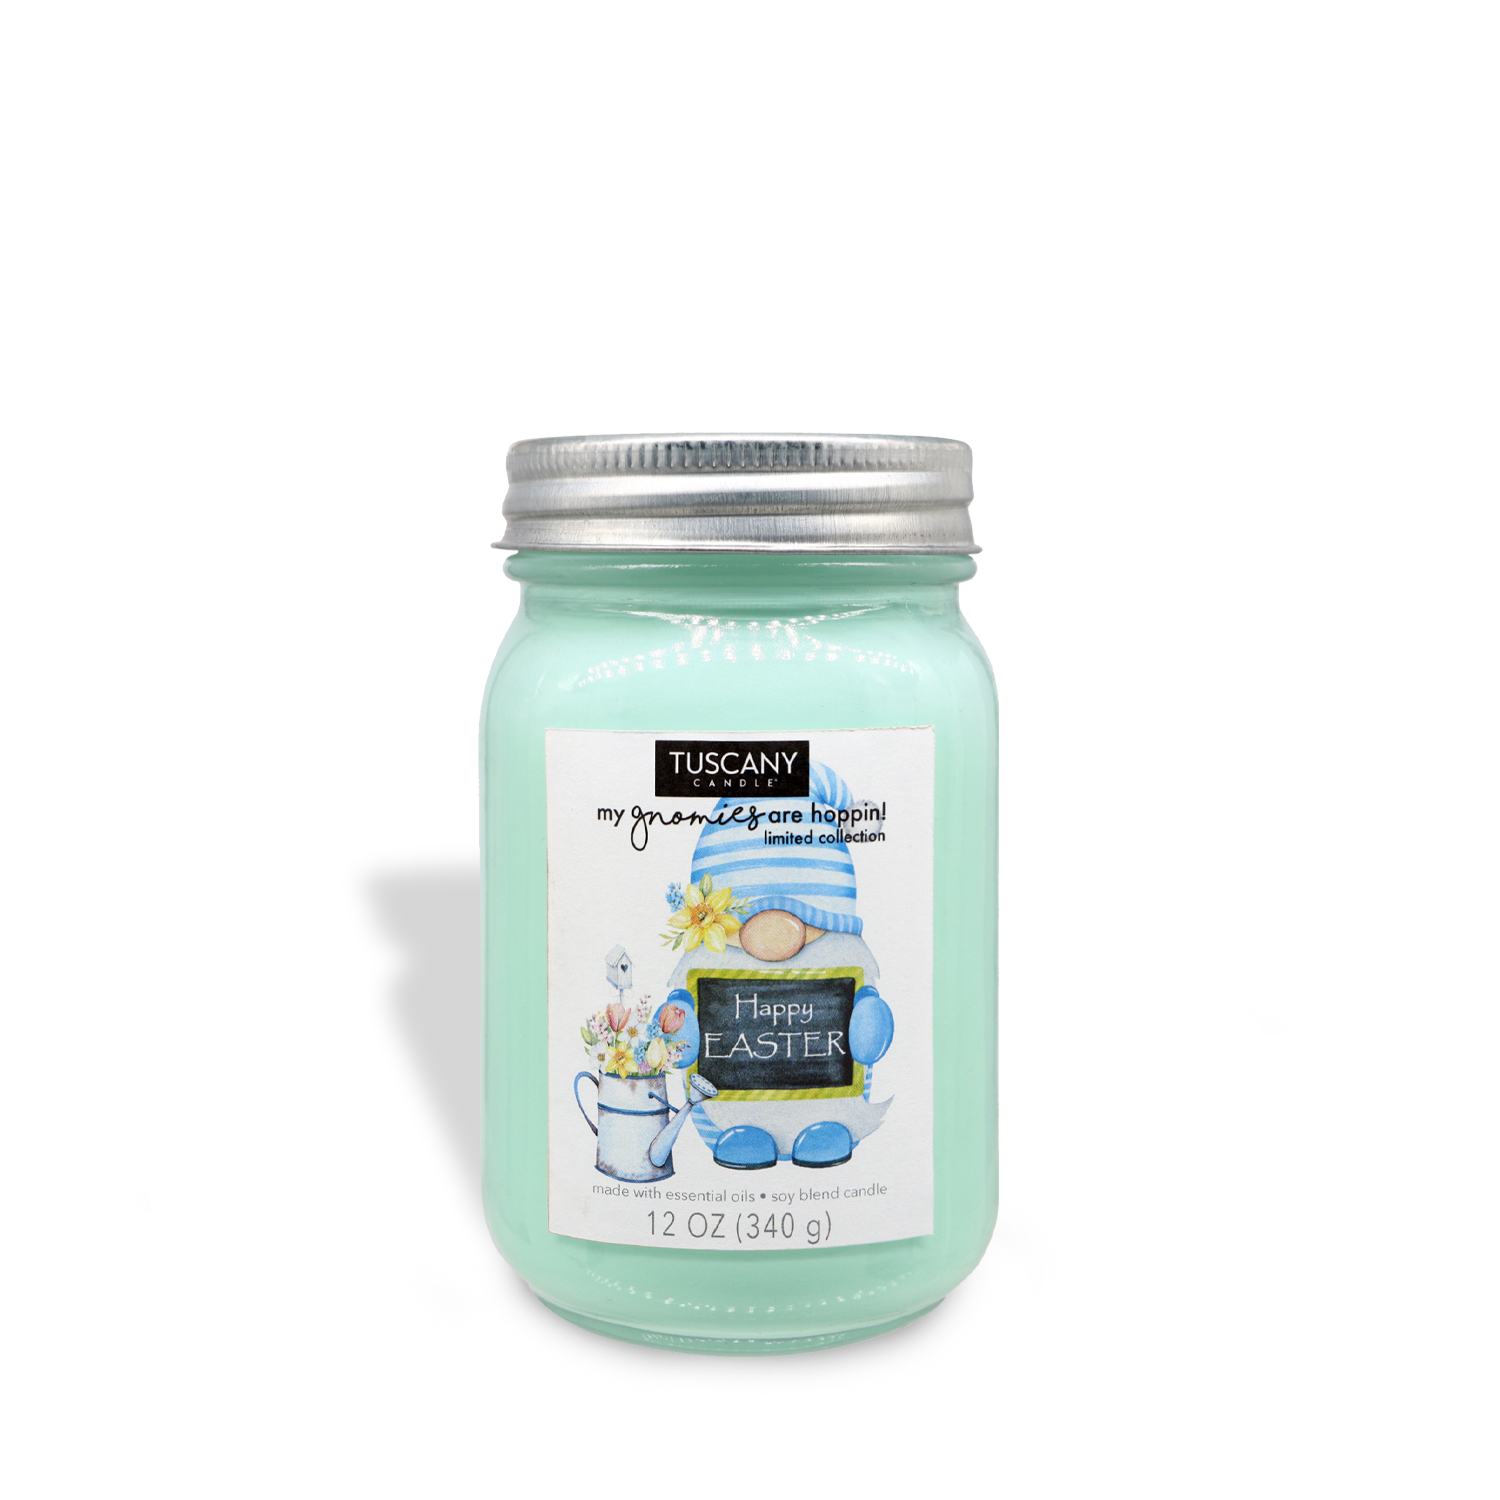 A Happy Easter Gnome (12 oz) jar infused with the refreshing scent of driftwood and sea salt, from the Tuscany Candle® SEASONAL collection.